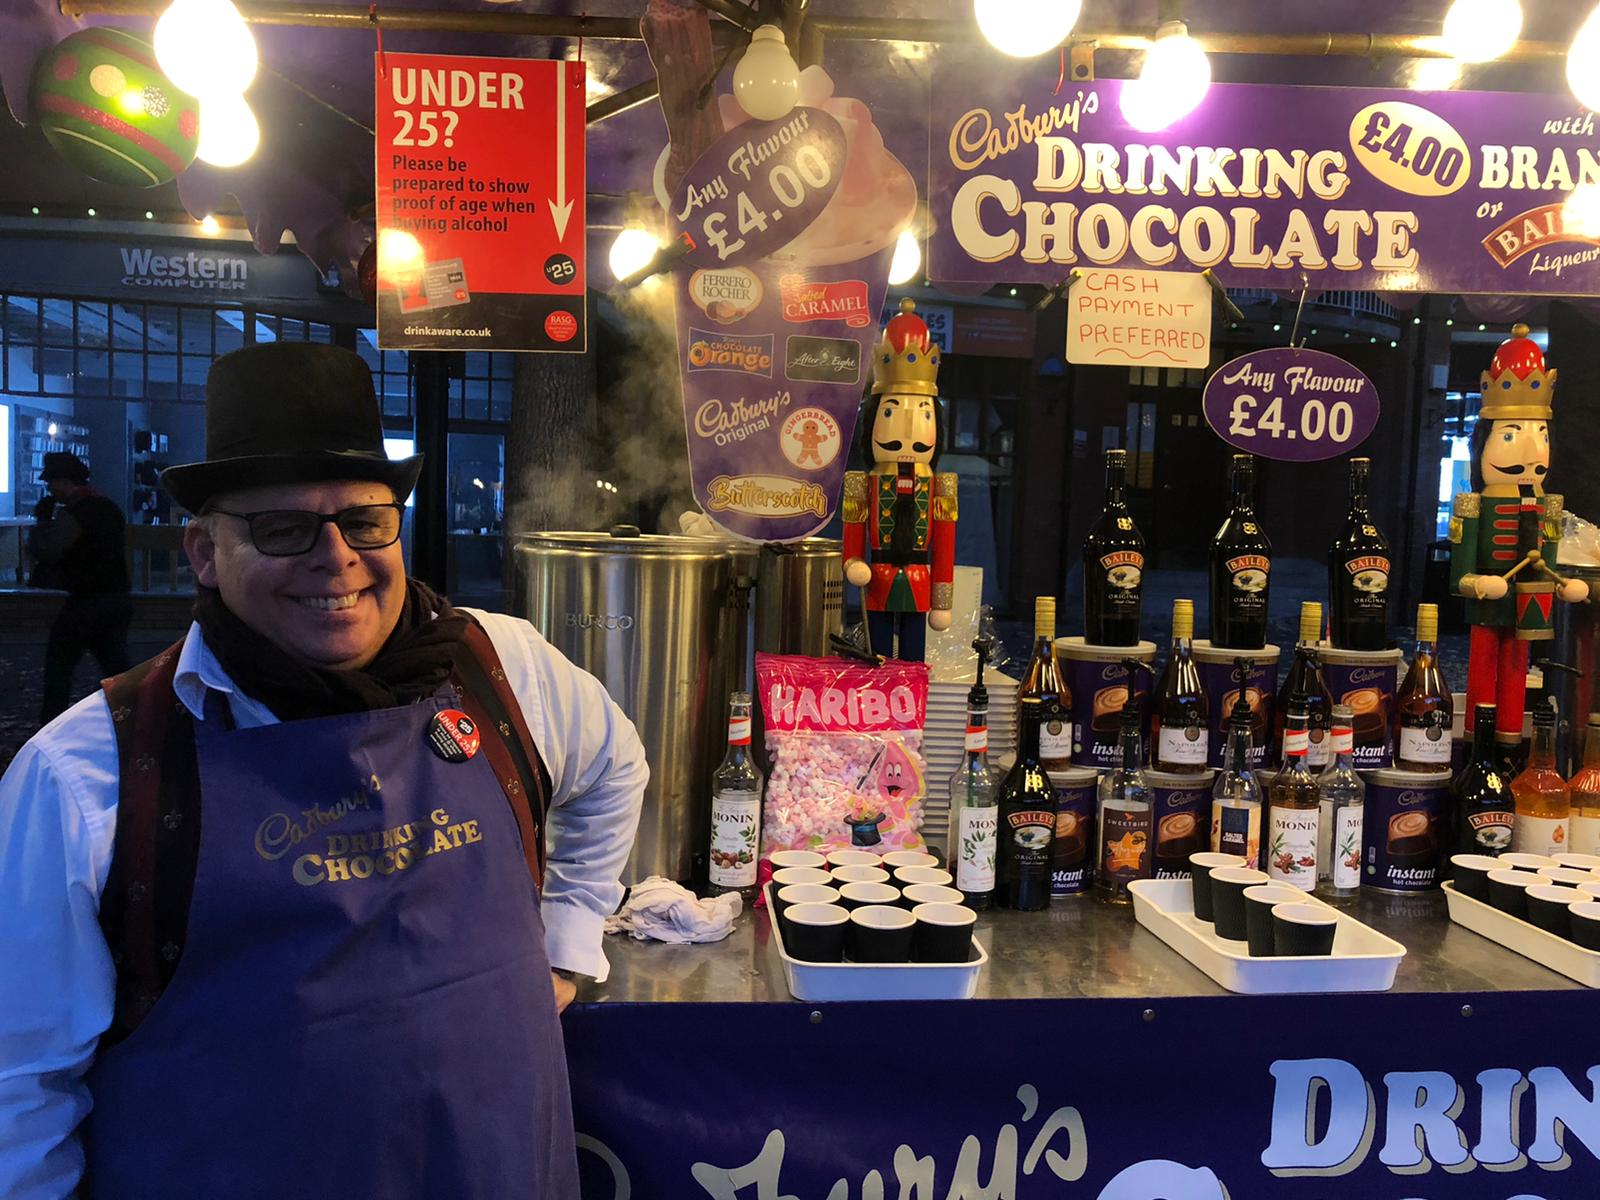 Cadburys Chocolate stall, with a man in purple apron and black top hat.